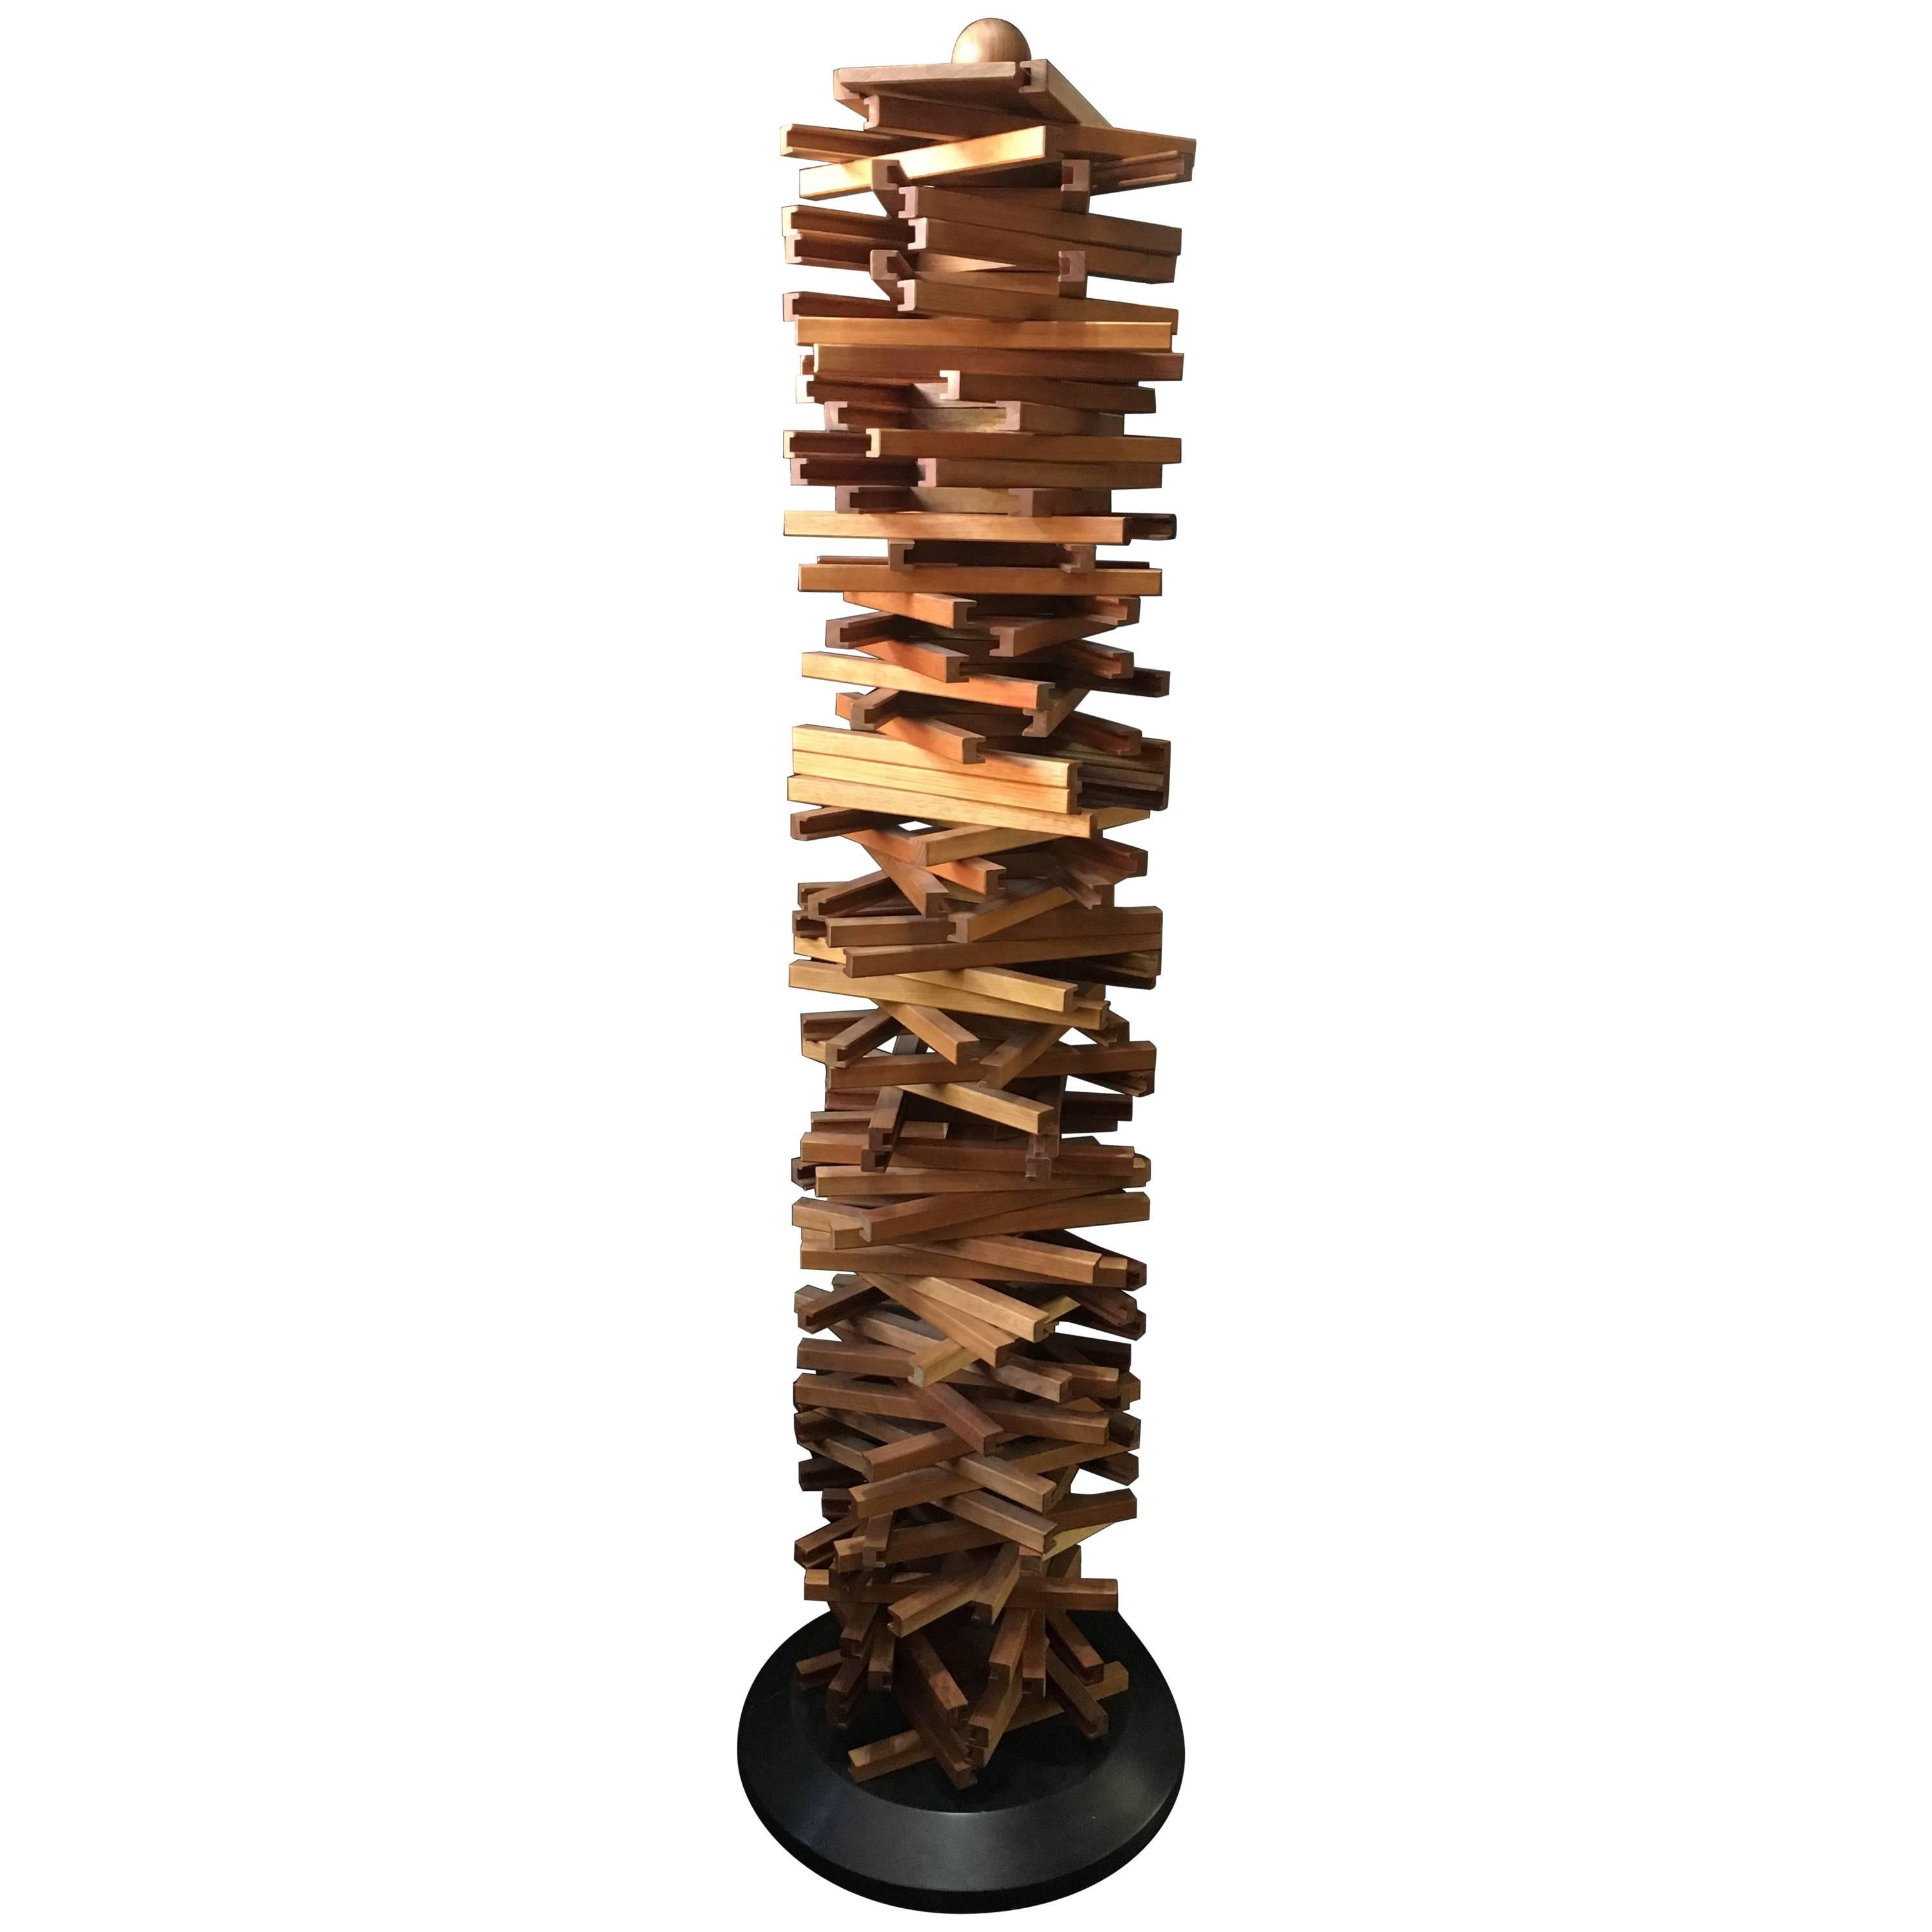 Unique Handcrafted CD Tower, Denmark, Late 20th Century